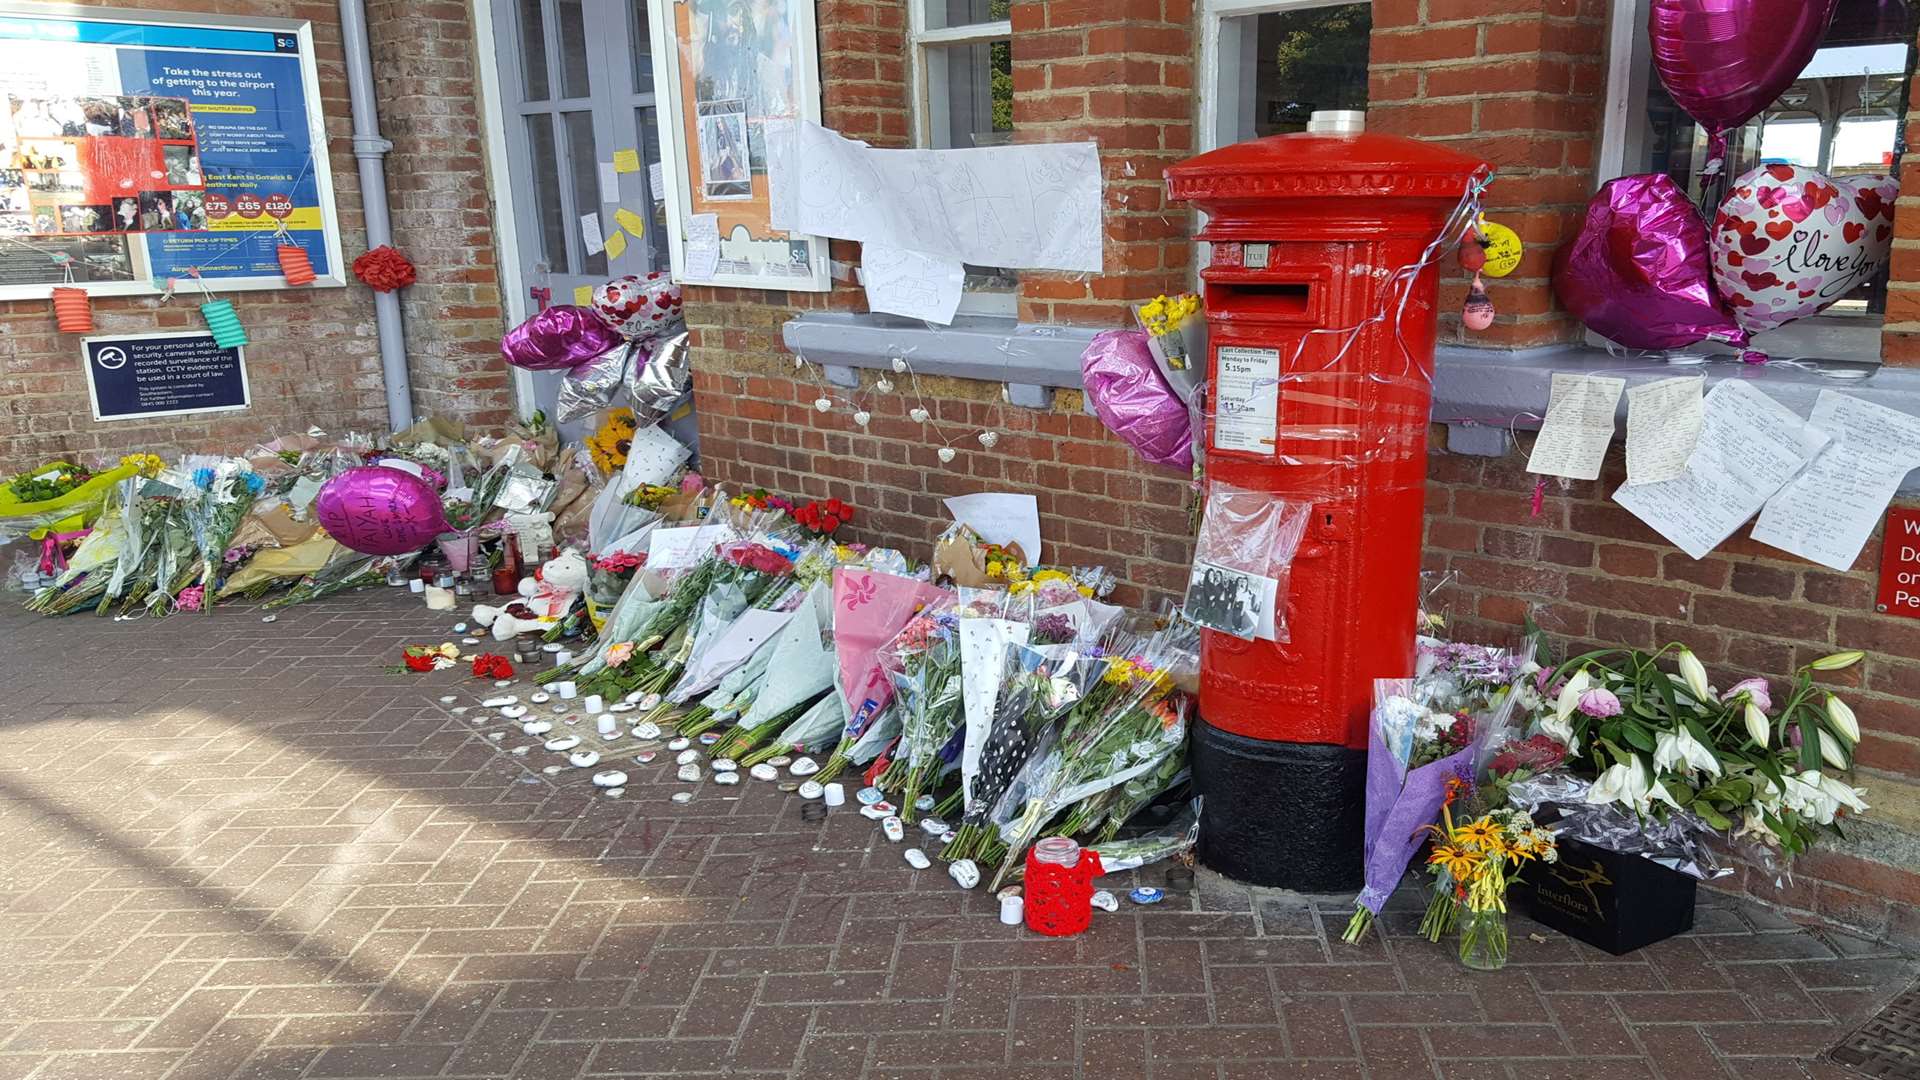 Flowers and messages for Taiyah-Grace Peebles at Herne Bay railway station